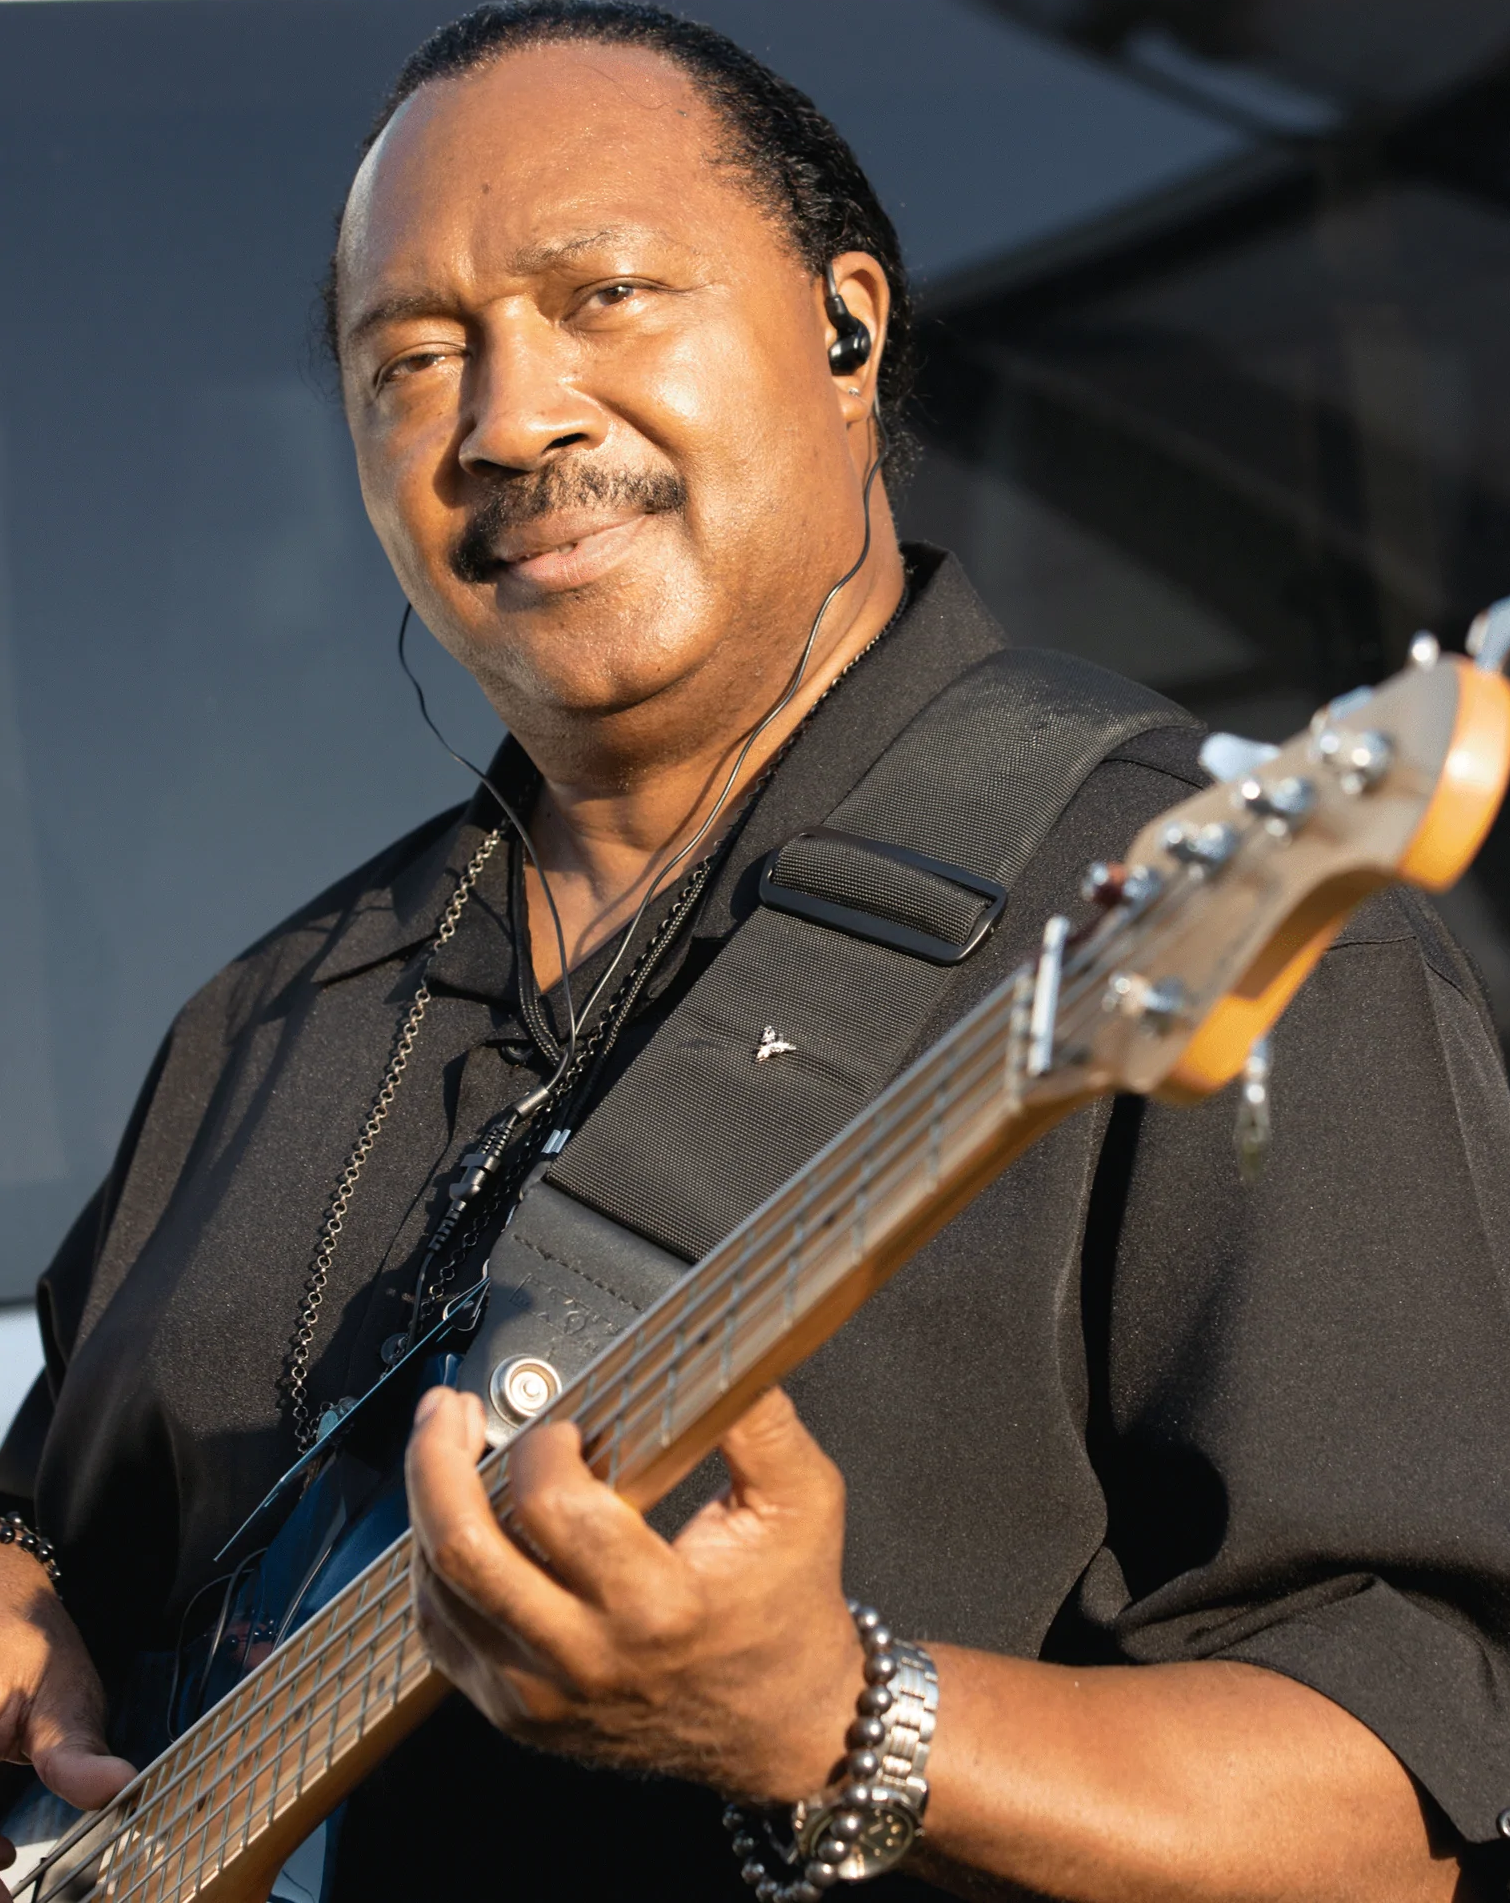 Renowned bassist Felton Crews has adopted the ASI Audio 3DME Active Ambient™ IEM system for its accurate and natural sound and the independent control it gives him over what he hears on stage